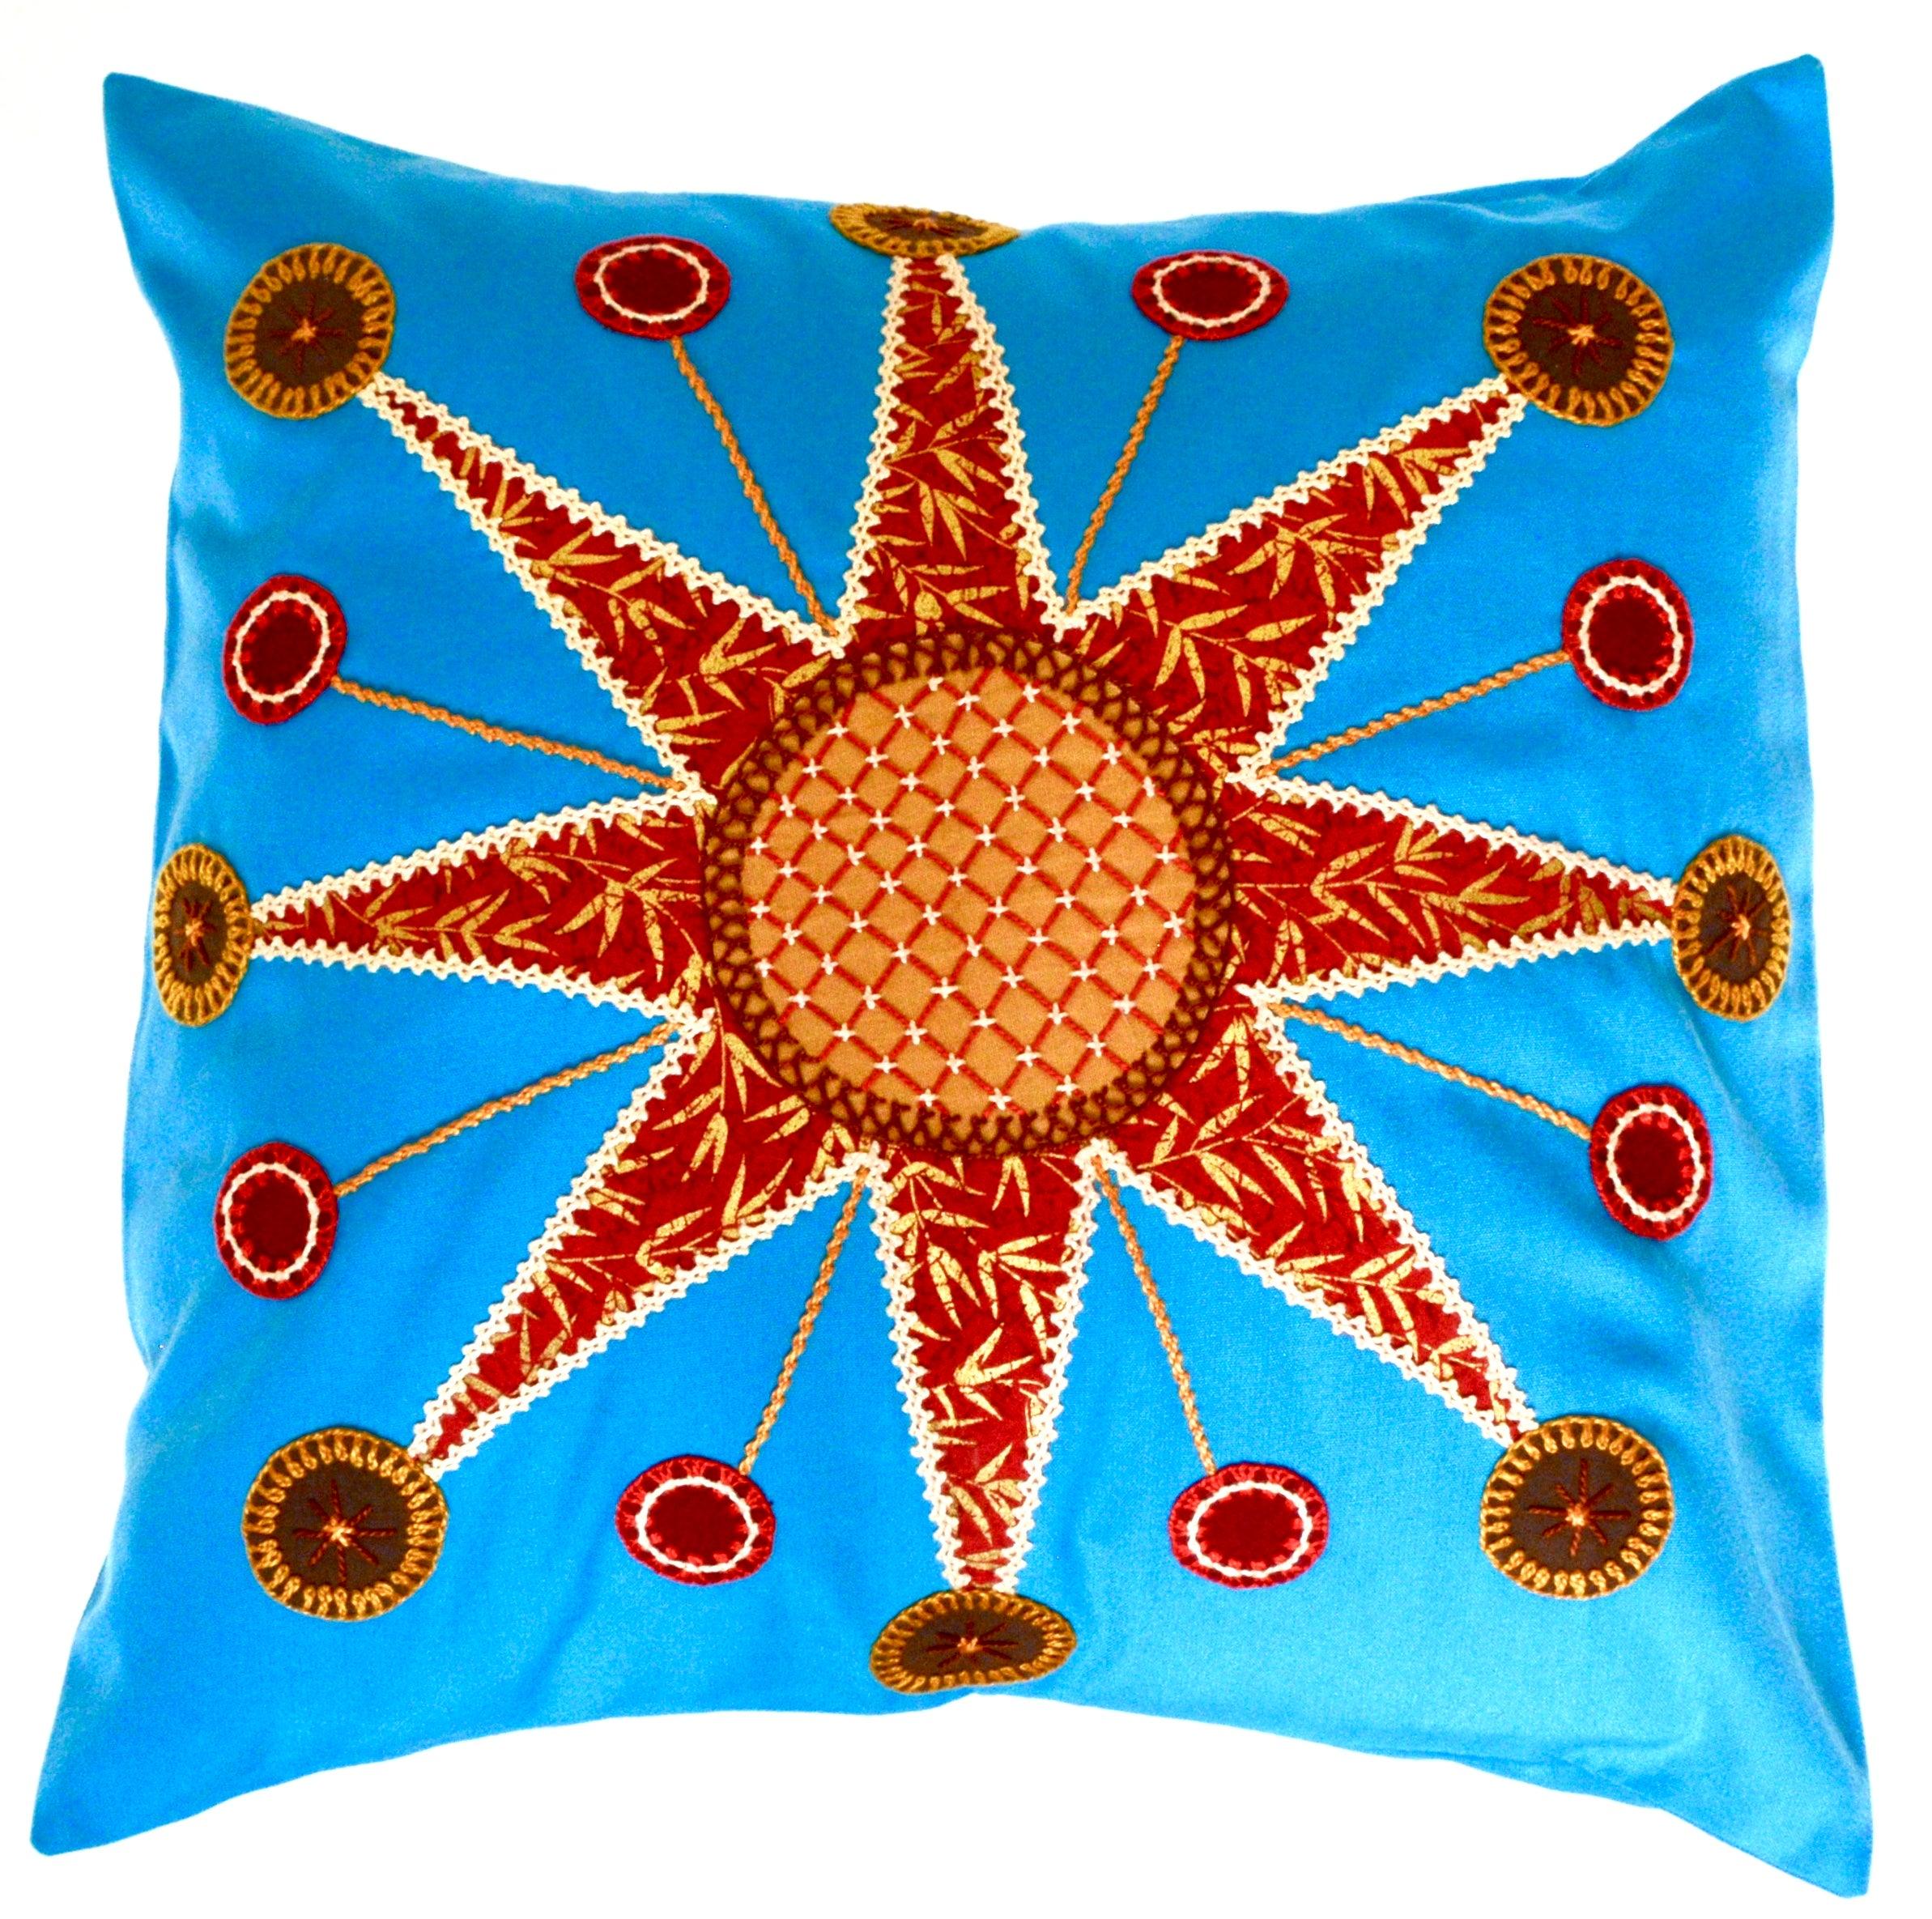 Sol Azul Design Embroidered Pillow on turquoise Honduras Threads